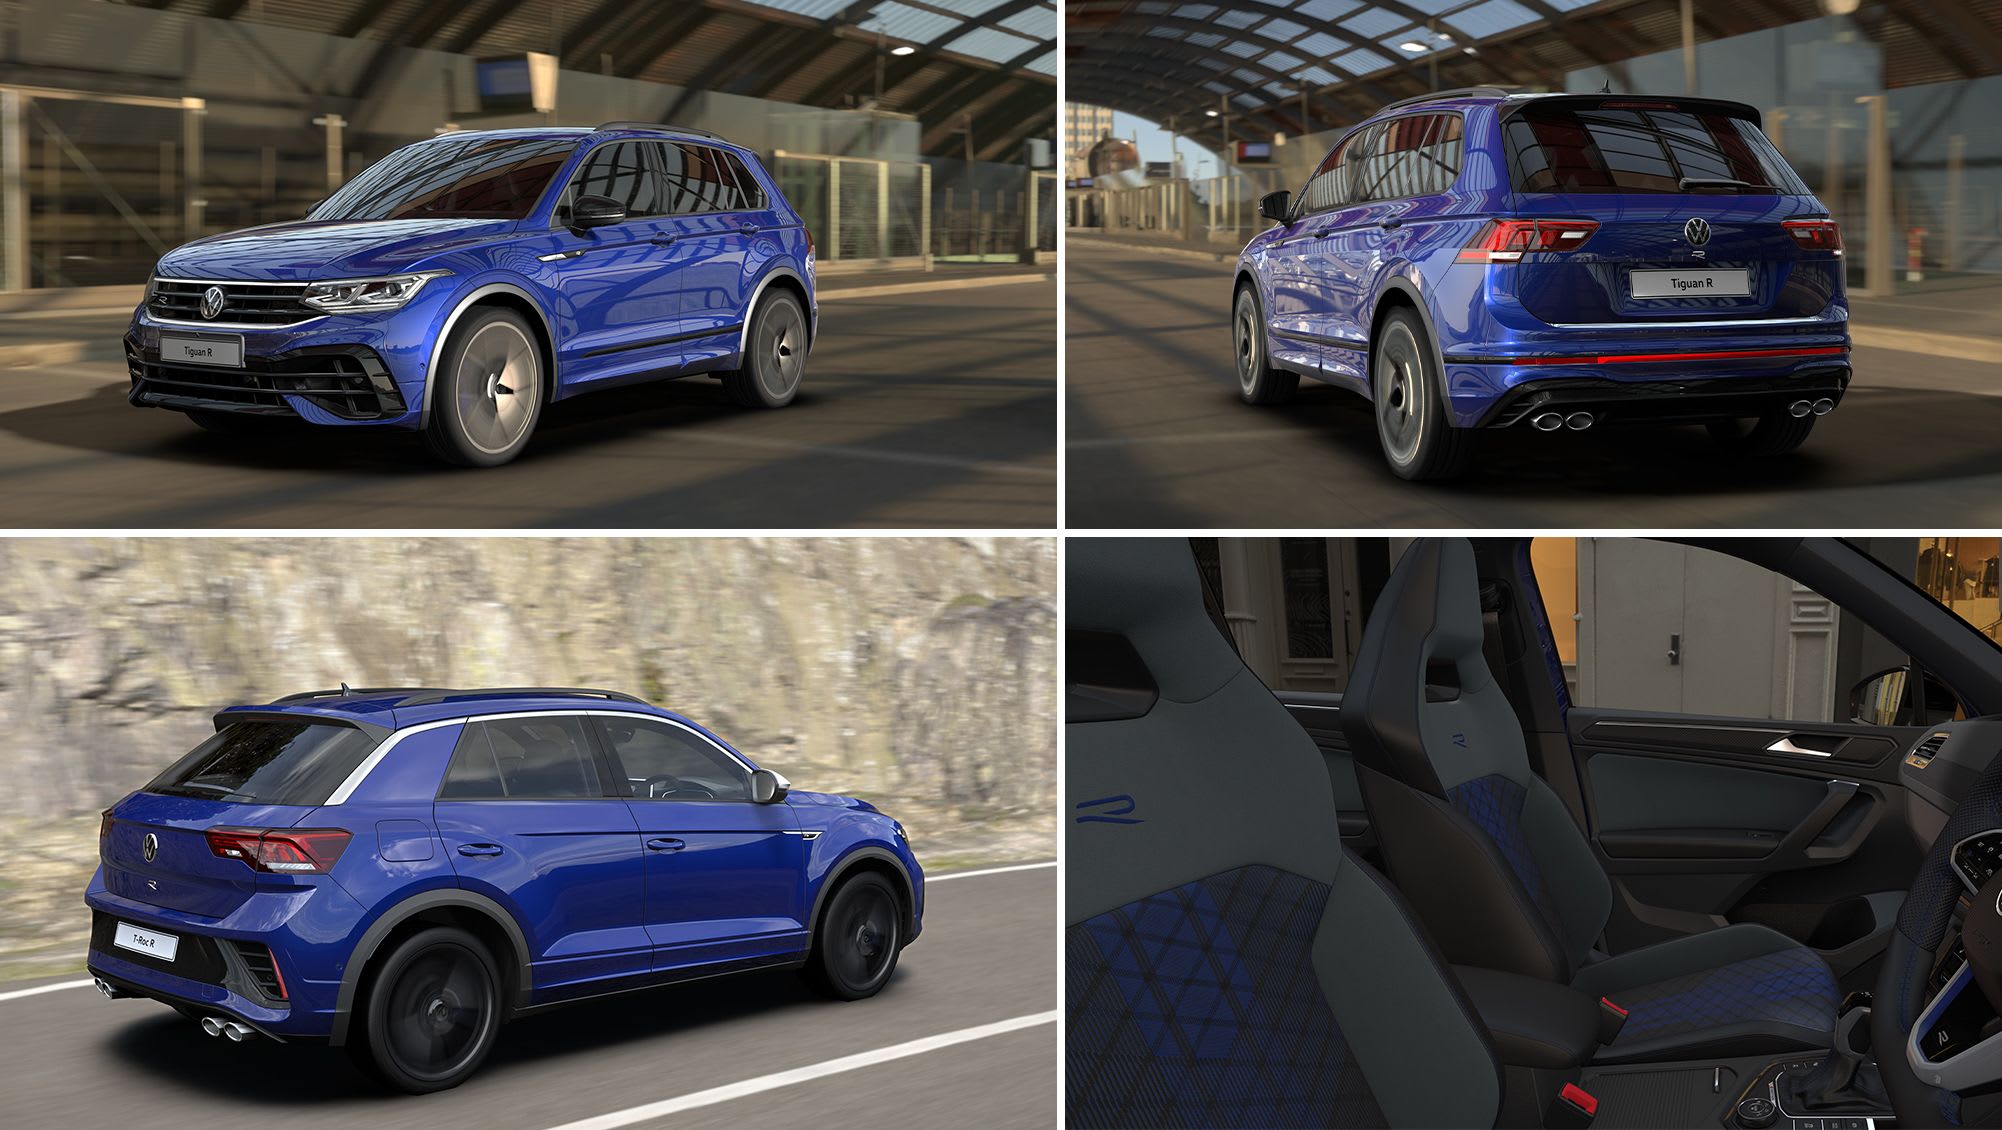 More R! 2023 Volkswagen T-Roc R and Tiguan R Grid Editions on the